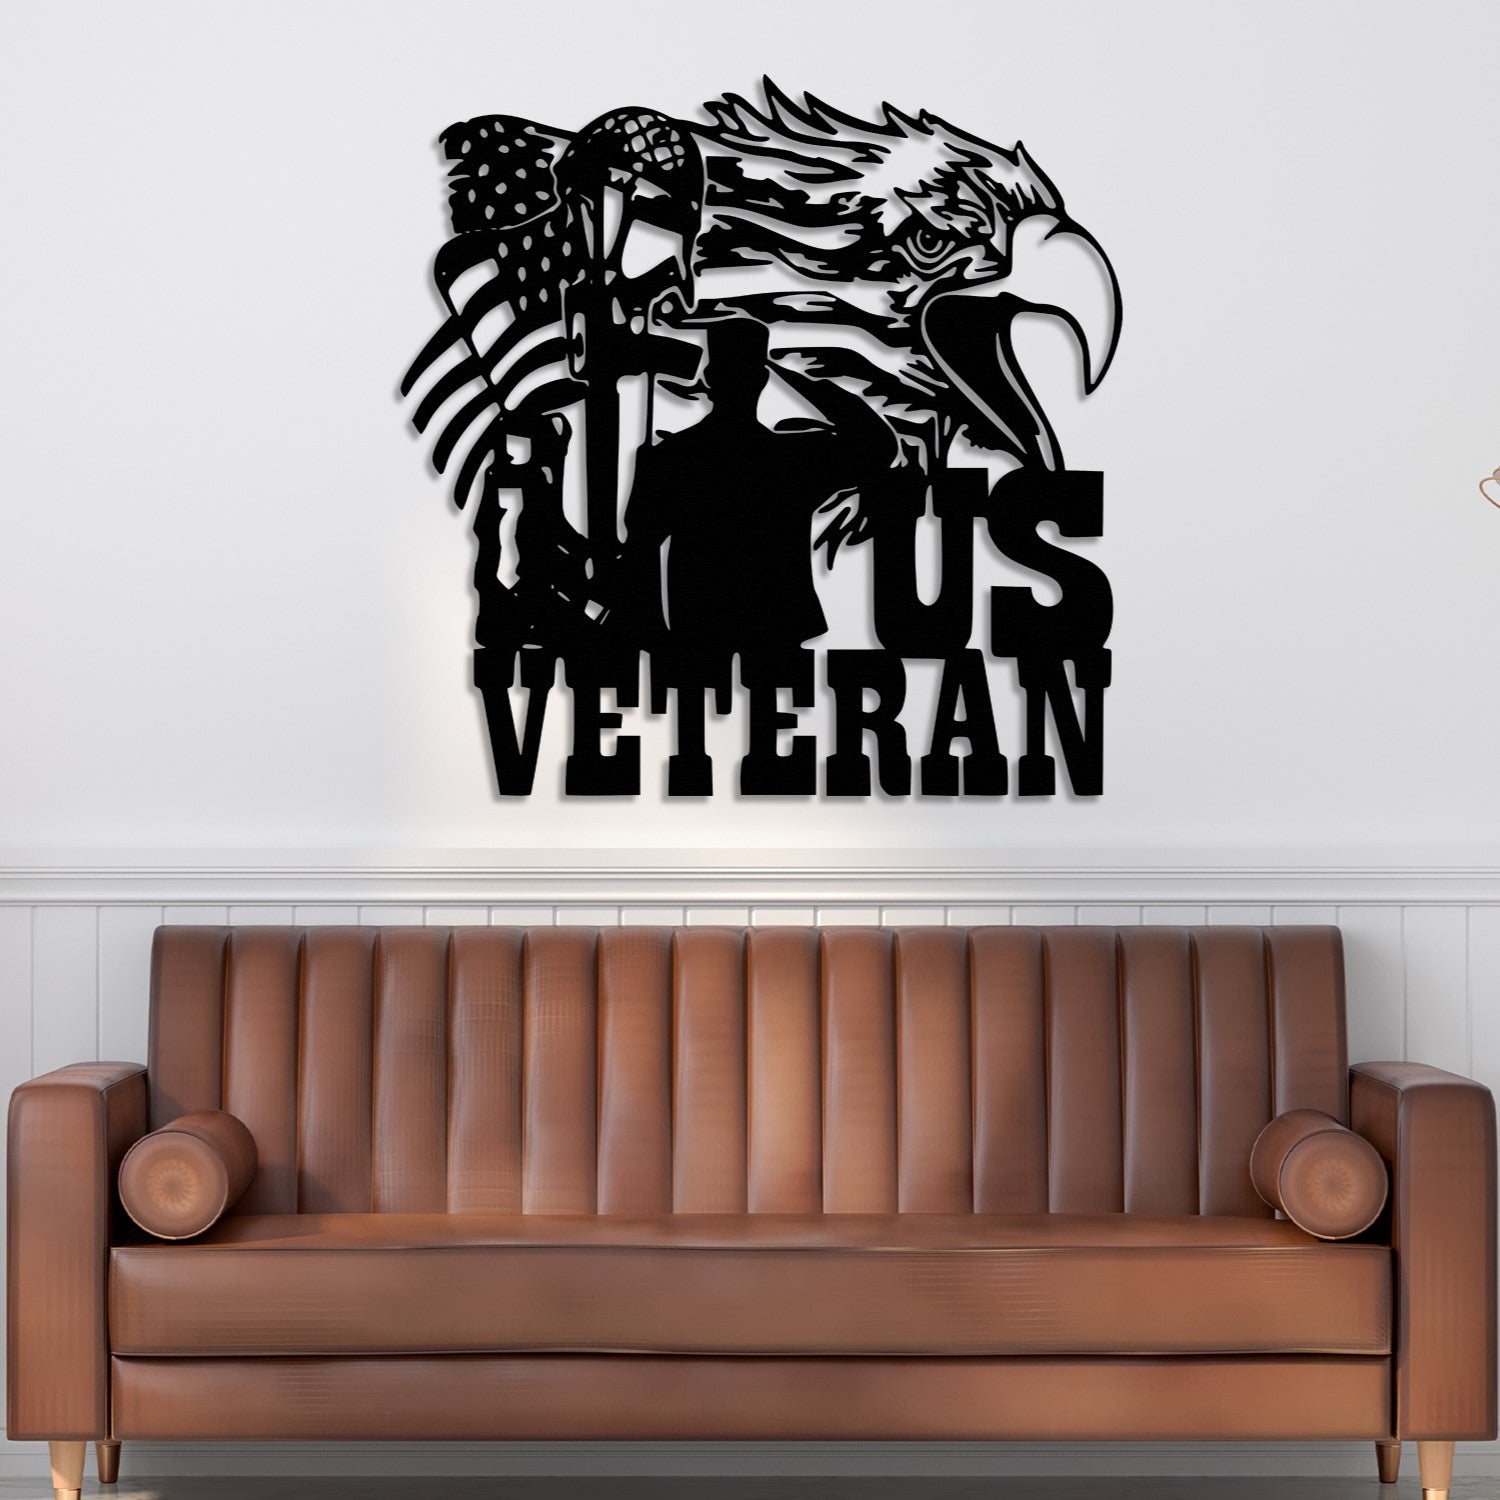 Veteran's Display: Celebrate an American hero with this US Veteran Independence Day Gift. The metal wall art showcases a majestic bald eagle and a distressed American flag, representing courage and sacrifice.